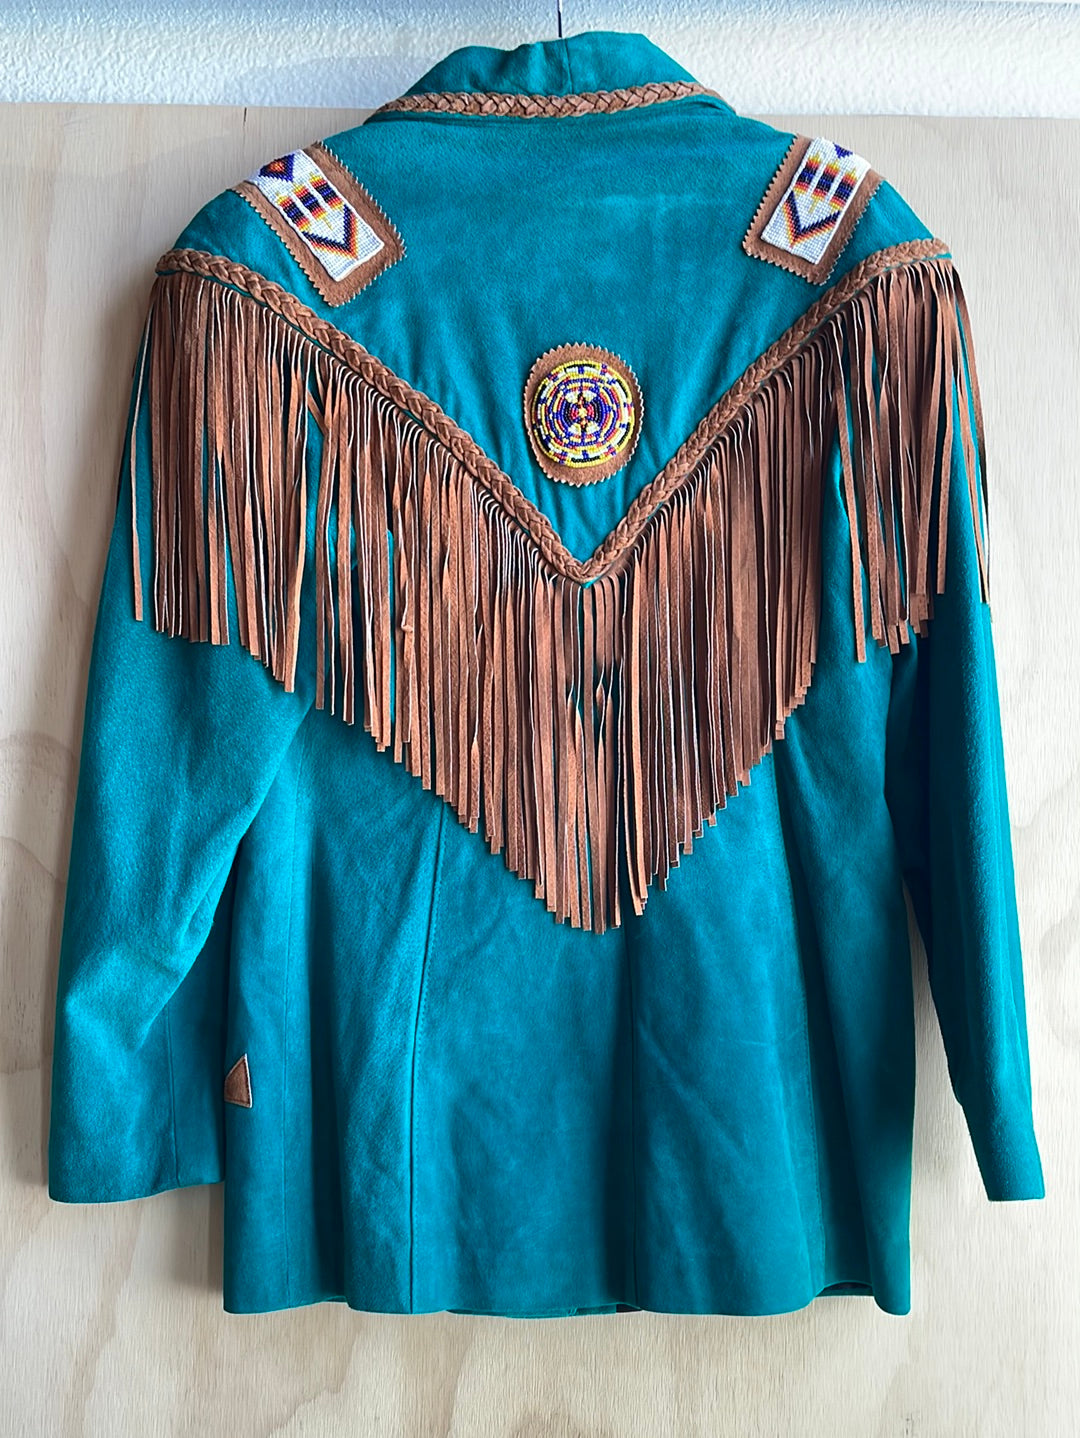 Real Leather Fringe Jacket with Beading on the Shoulders